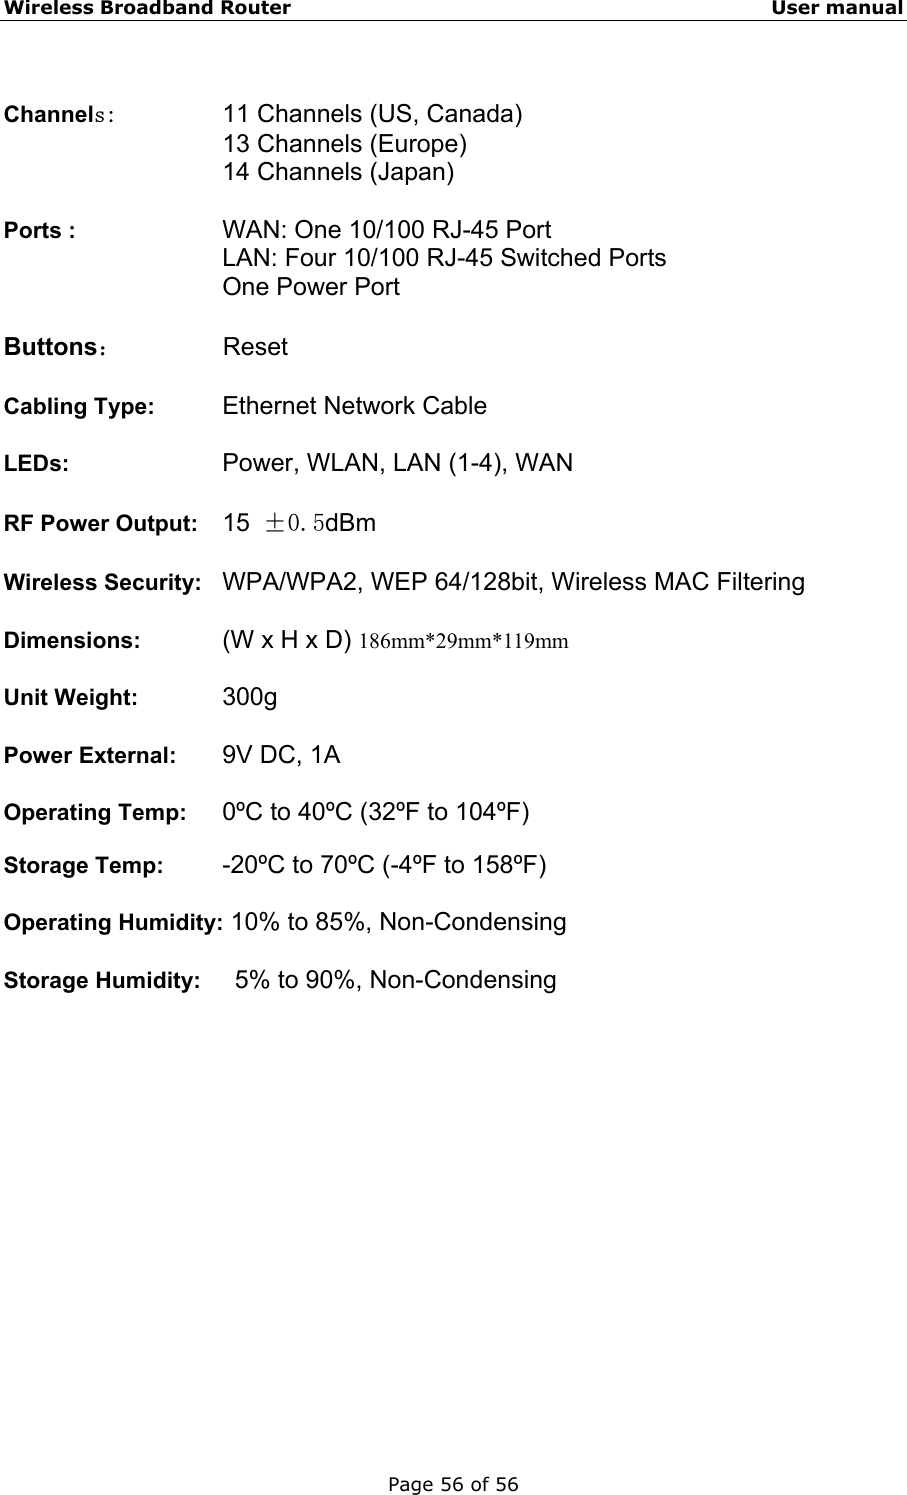 Wireless Broadband Router                                                   User manual Page 56 of 56  Channels:      11 Channels (US, Canada)      13 Channels (Europe) 14 Channels (Japan)  Ports :        WAN: One 10/100 RJ-45 Port LAN: Four 10/100 RJ-45 Switched Ports One Power Port  Buttons：        Reset  Cabling Type:    Ethernet Network Cable  LEDs:     Power, WLAN, LAN (1-4), WAN  RF Power Output:    15 ±0.5dBm  Wireless Security:   WPA/WPA2, WEP 64/128bit, Wireless MAC Filtering  Dimensions:   (W x H x D) 186mm*29mm*119mm  Unit Weight:    300g  Power External:   9V DC, 1A  Operating Temp:  0ºC to 40ºC (32ºF to 104ºF)  Storage Temp:    -20ºC to 70ºC (-4ºF to 158ºF)  Operating Humidity: 10% to 85%, Non-Condensing  Storage Humidity:    5% to 90%, Non-Condensing   